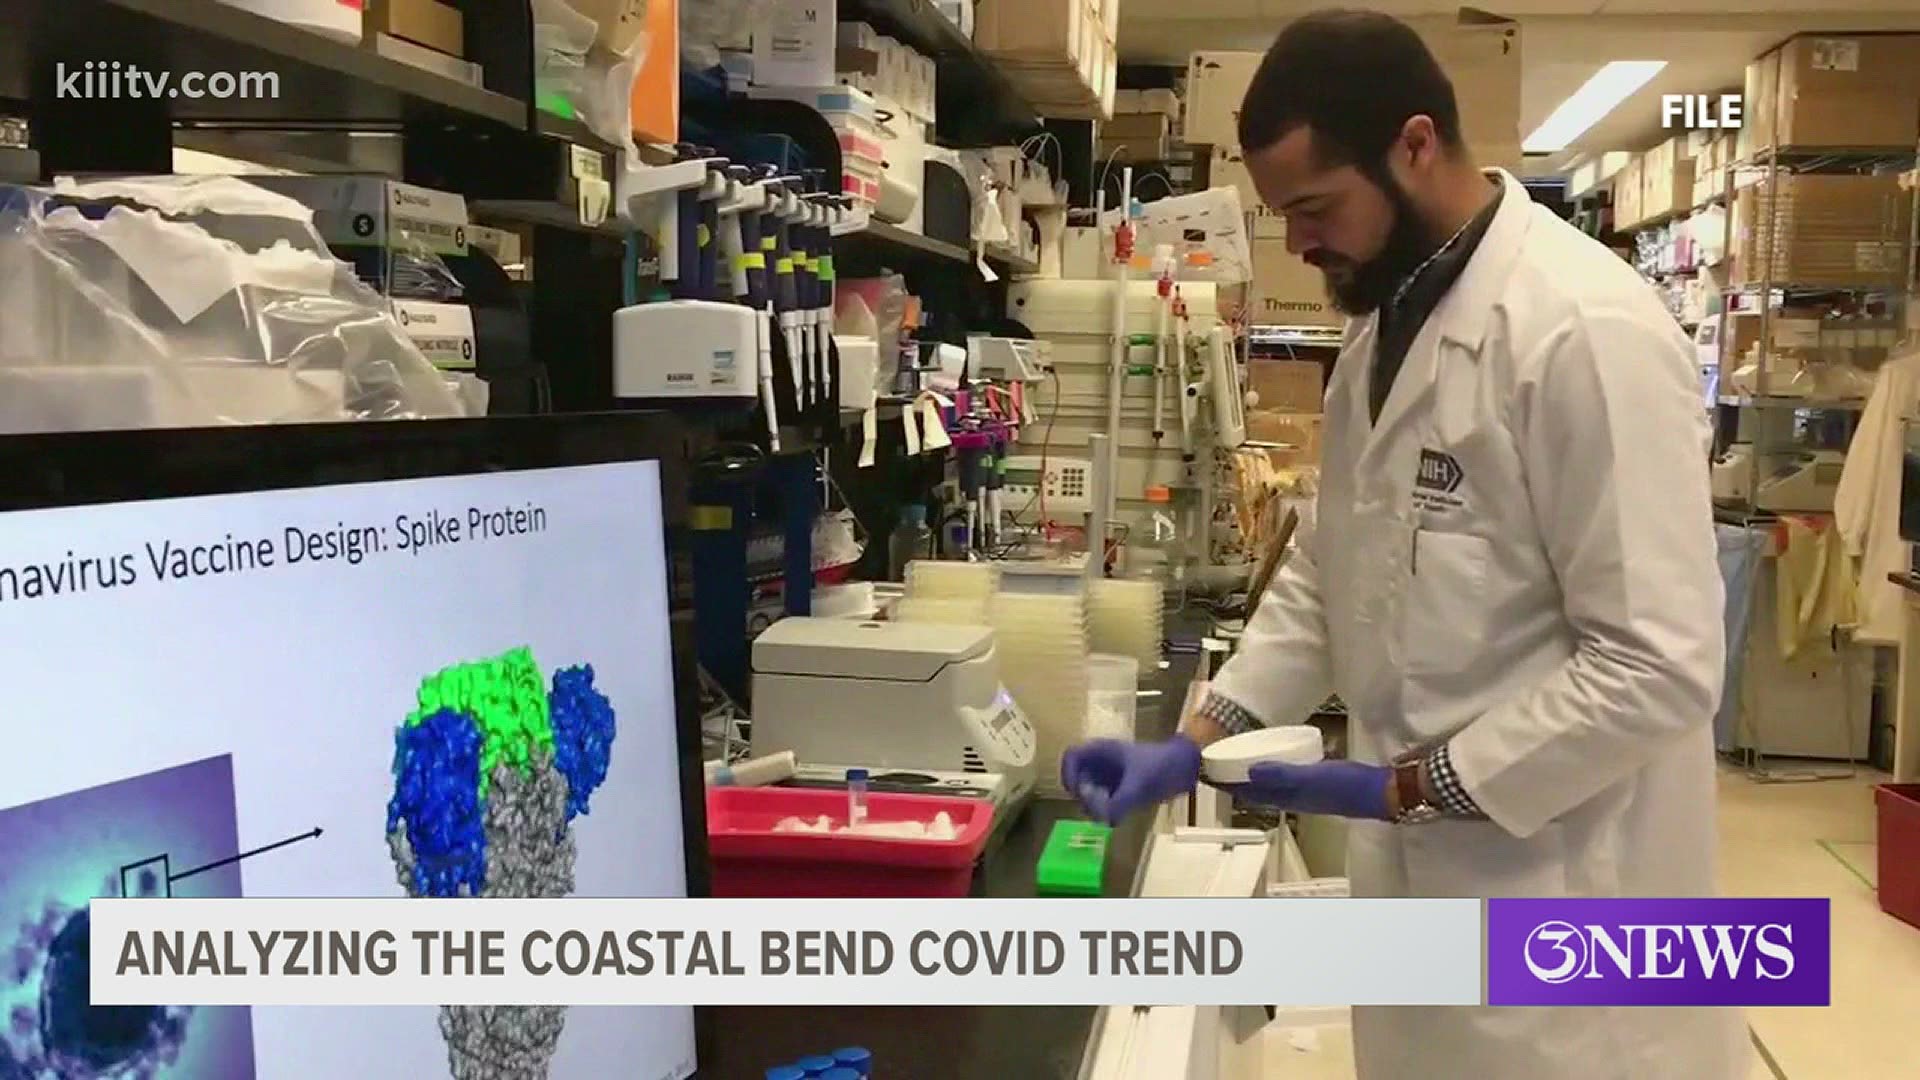 March, April and part of May showed a slow but steady increase of coronavirus cases in the Coastal Bend.